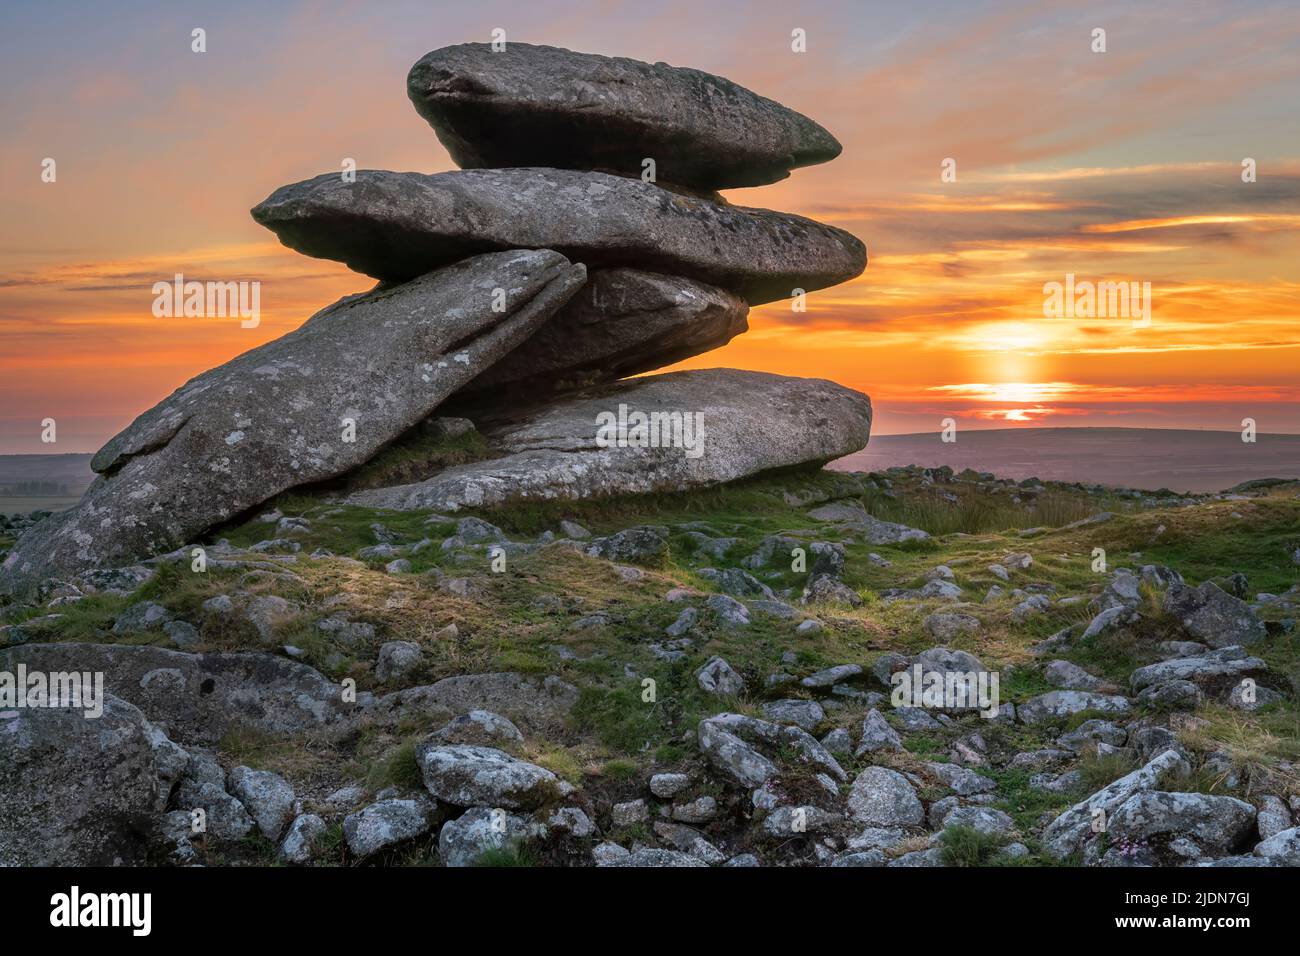 Showery Tor, Bodmin Moor, Cornwall, England. Monday 20th June 2022. On the evening before the longest day of the year, the Summer Solstice in the Nort Stock Photo